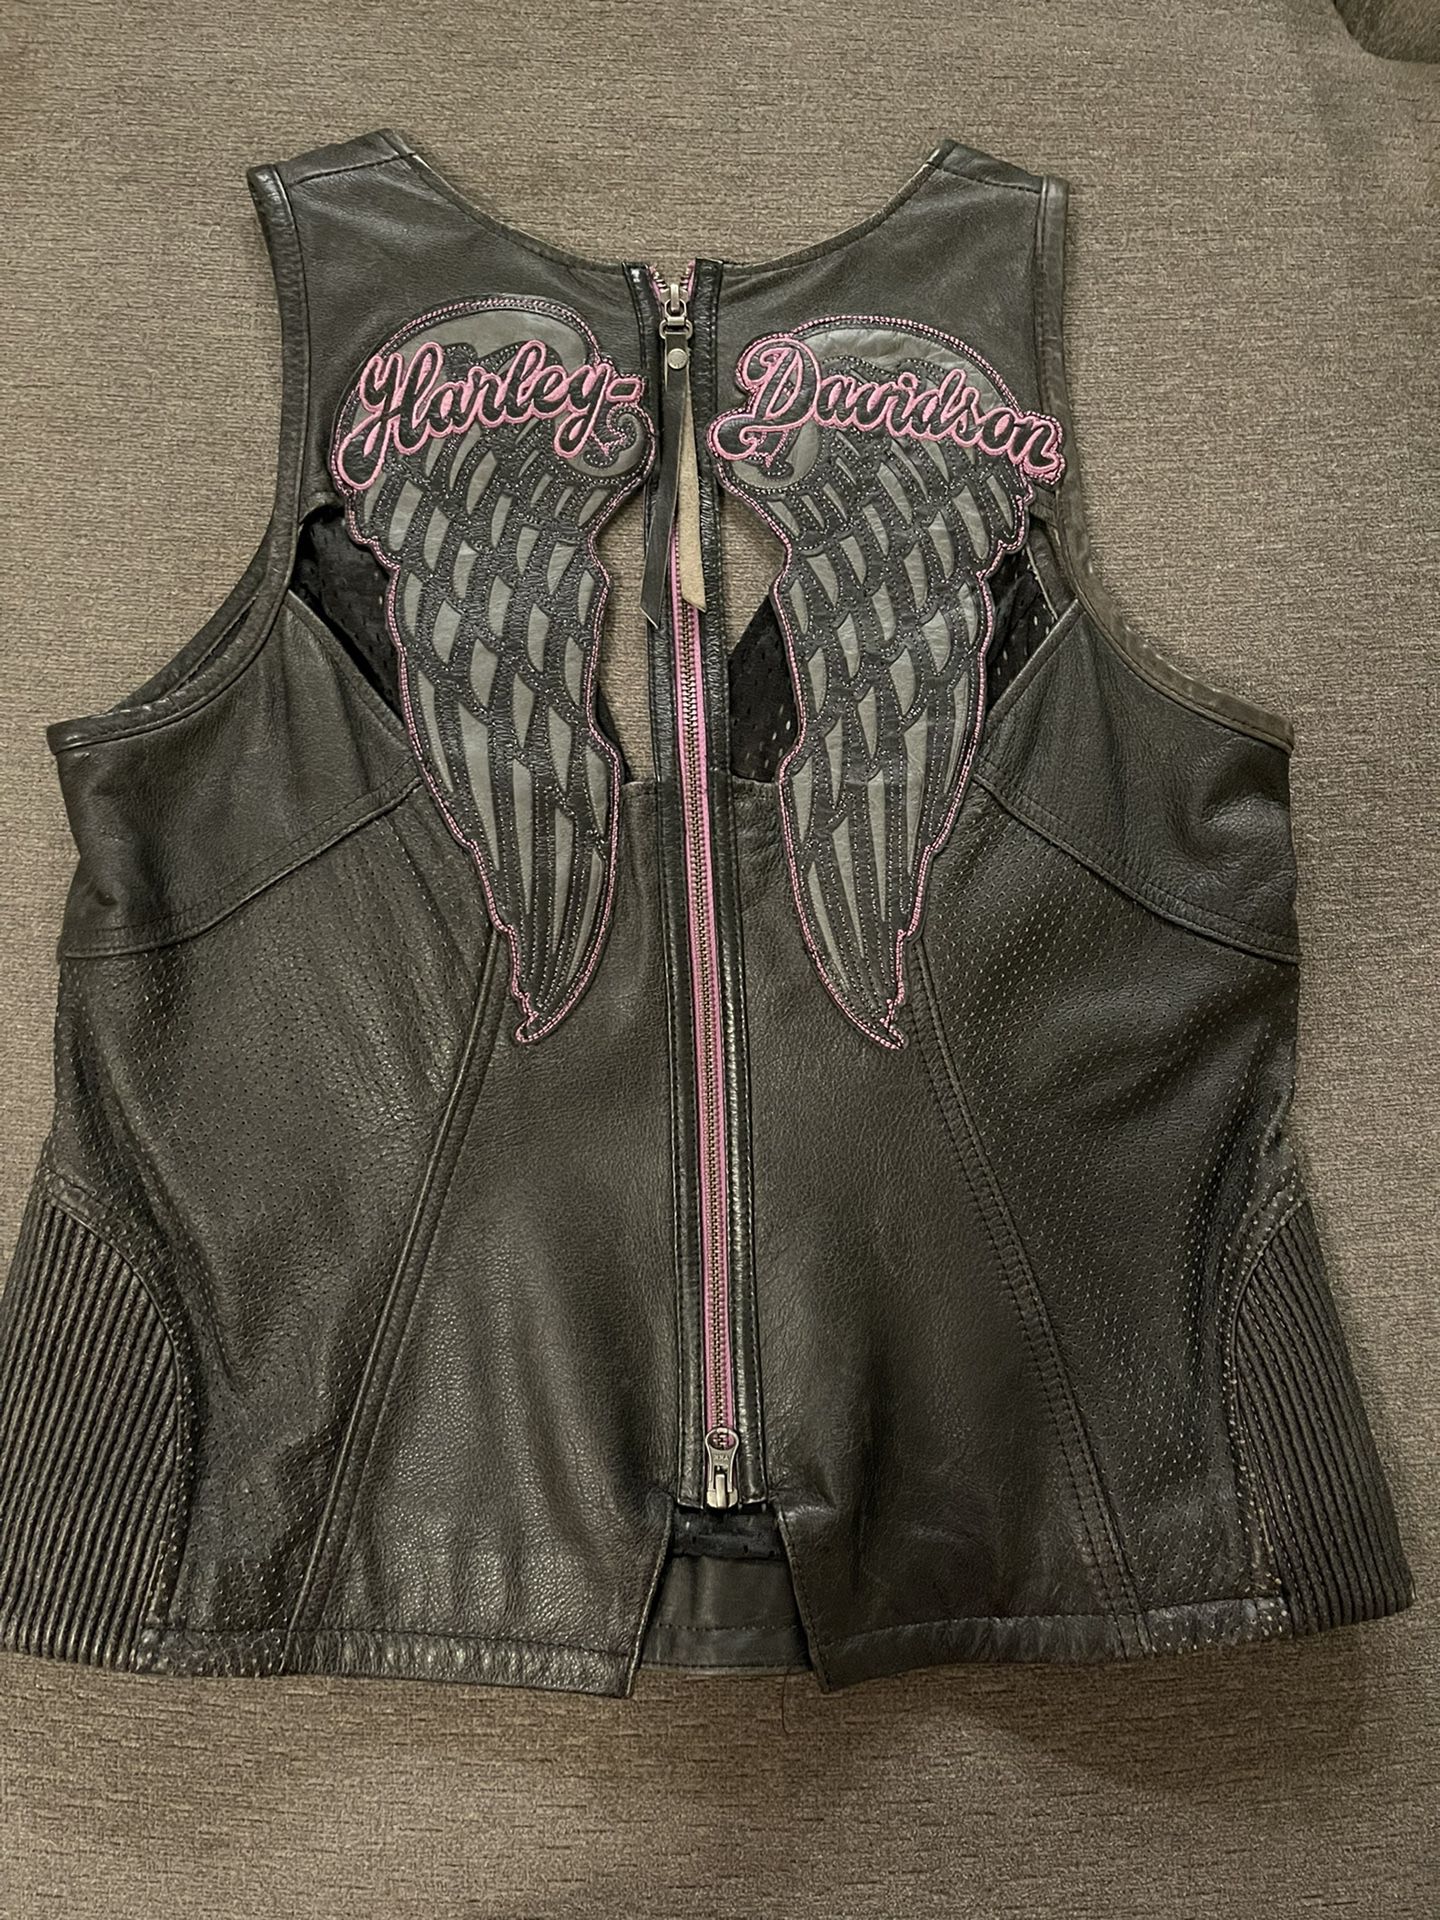 Leather Vest’s 60$ Each OBO 